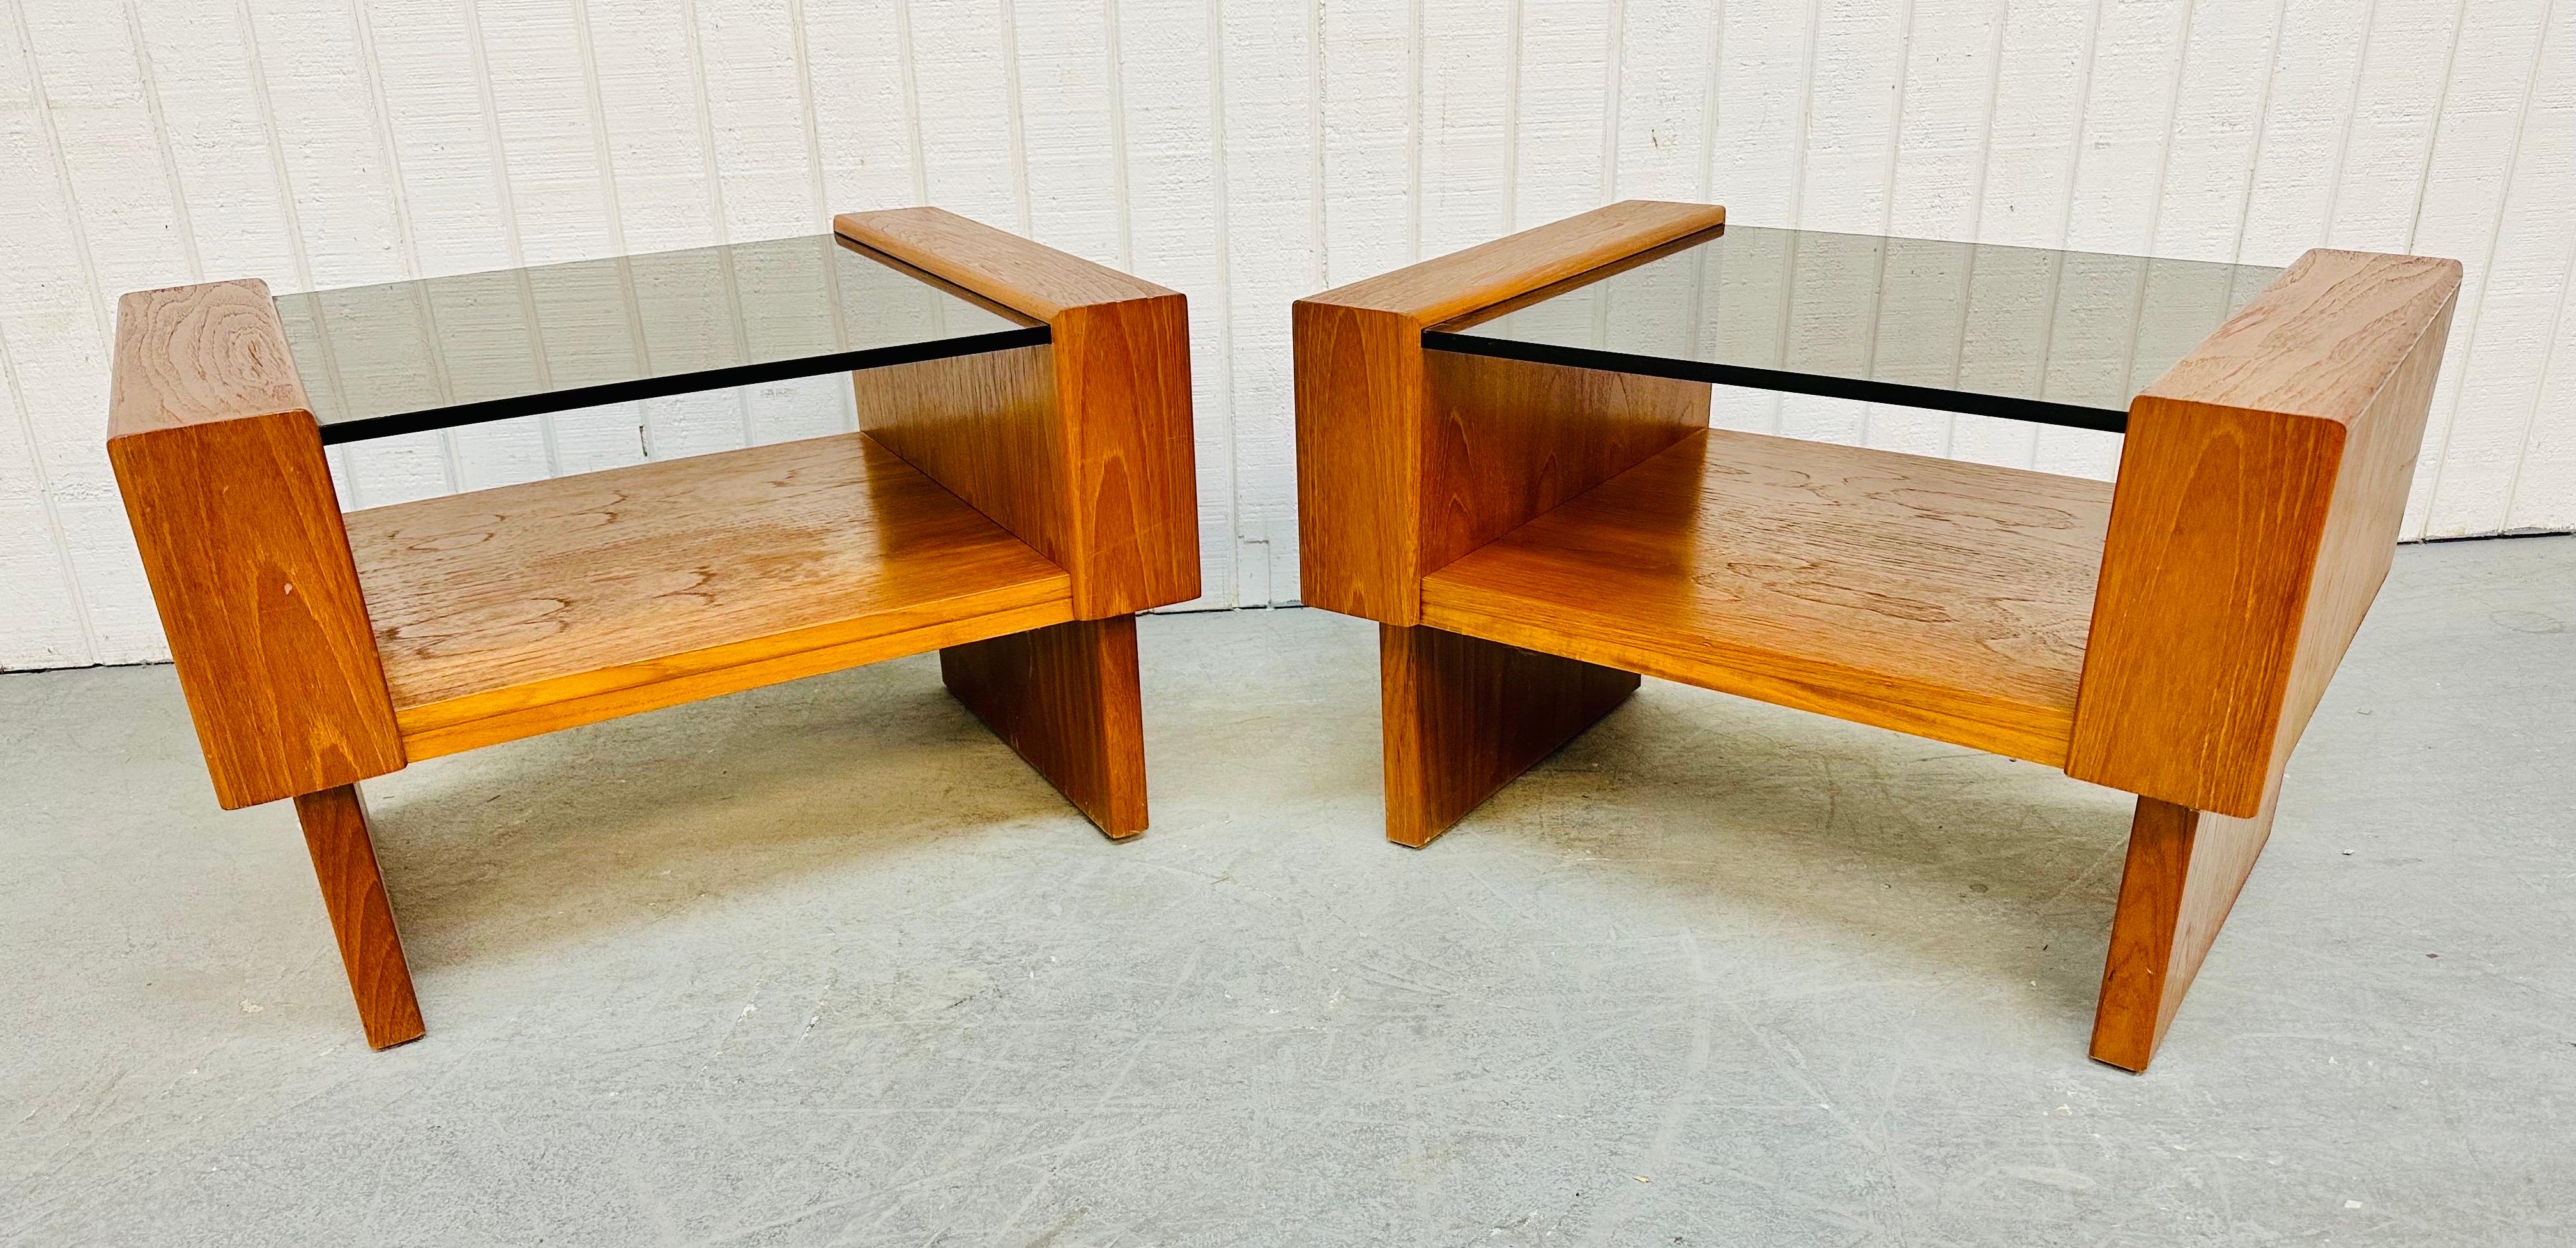 This listing is for a pair of vintage Danish Modern Teak Smoked Glass Side Tables. Featuring a rectangular design, teak base, smoked glass tops, and an open space under the glass for magazine storage.